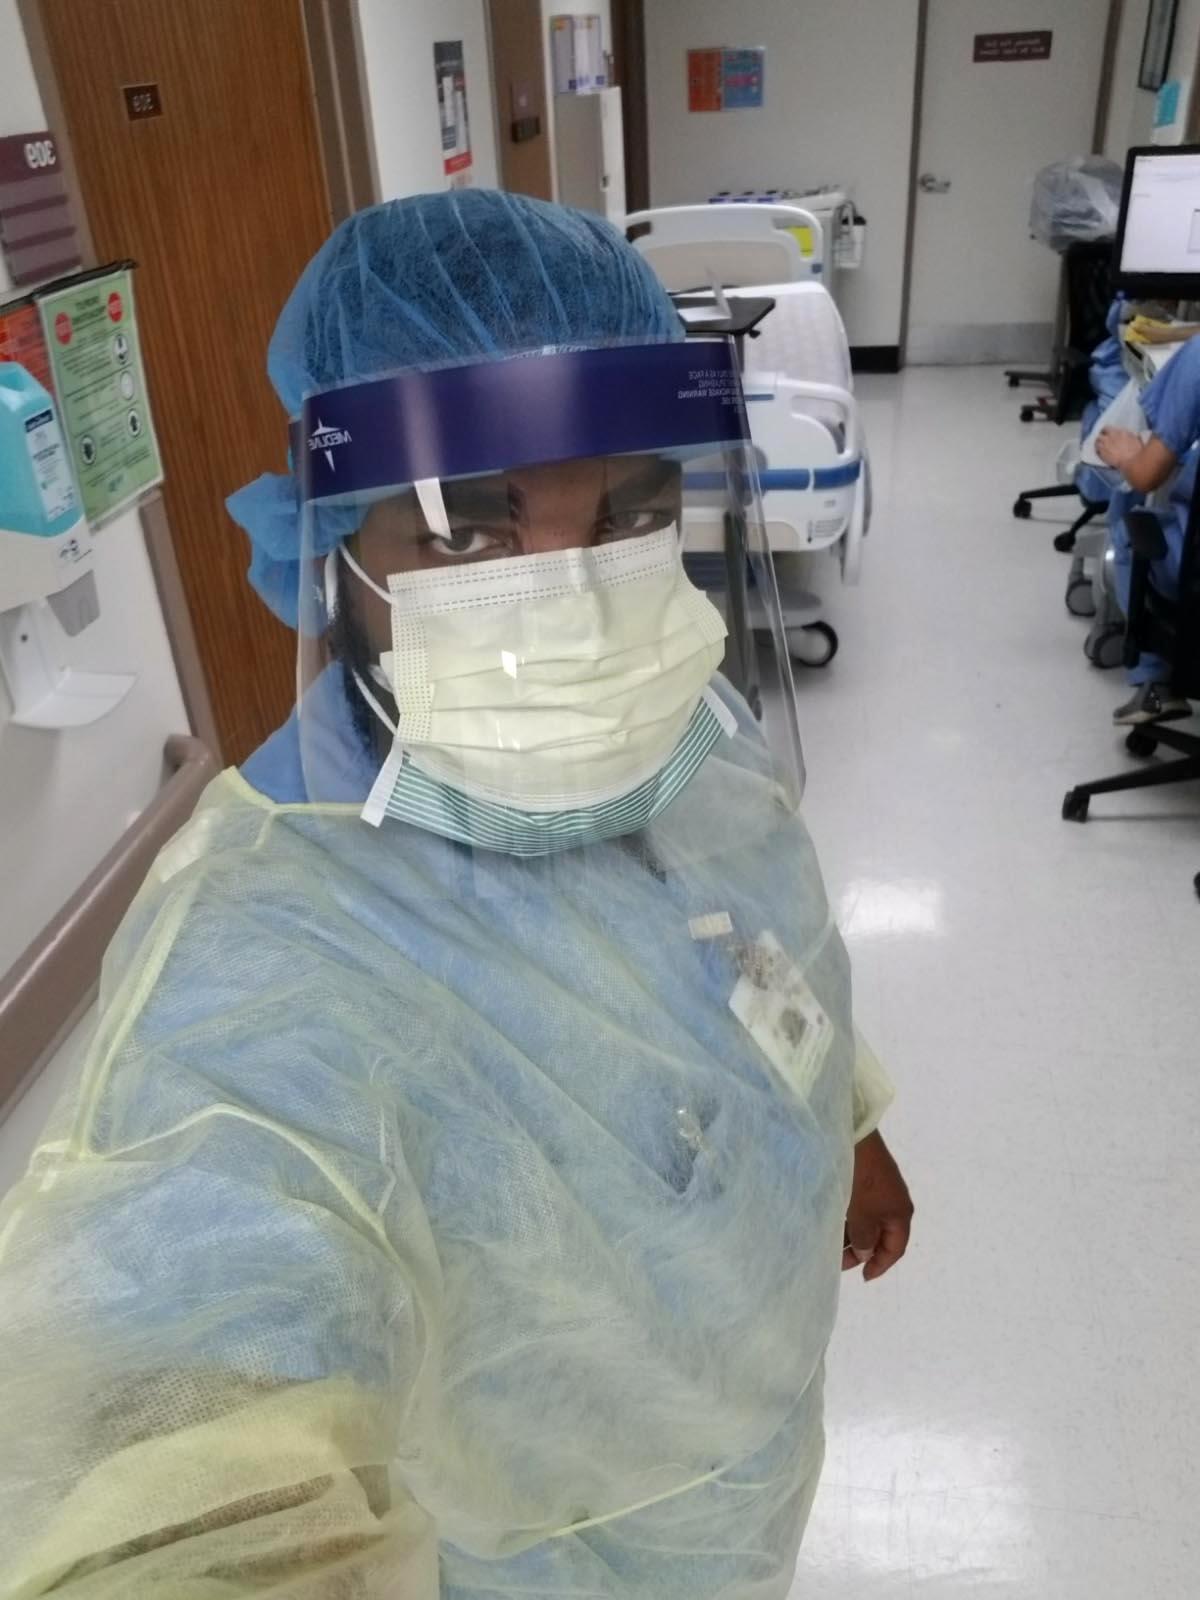 Andre Ross said the only time he is allowed to wear full safety gear — a gown, coverings for his hair and shoes, a face shield — in addition to his surgical mask and gloves is when he disinfects the rooms of possible COVID-19 patients.